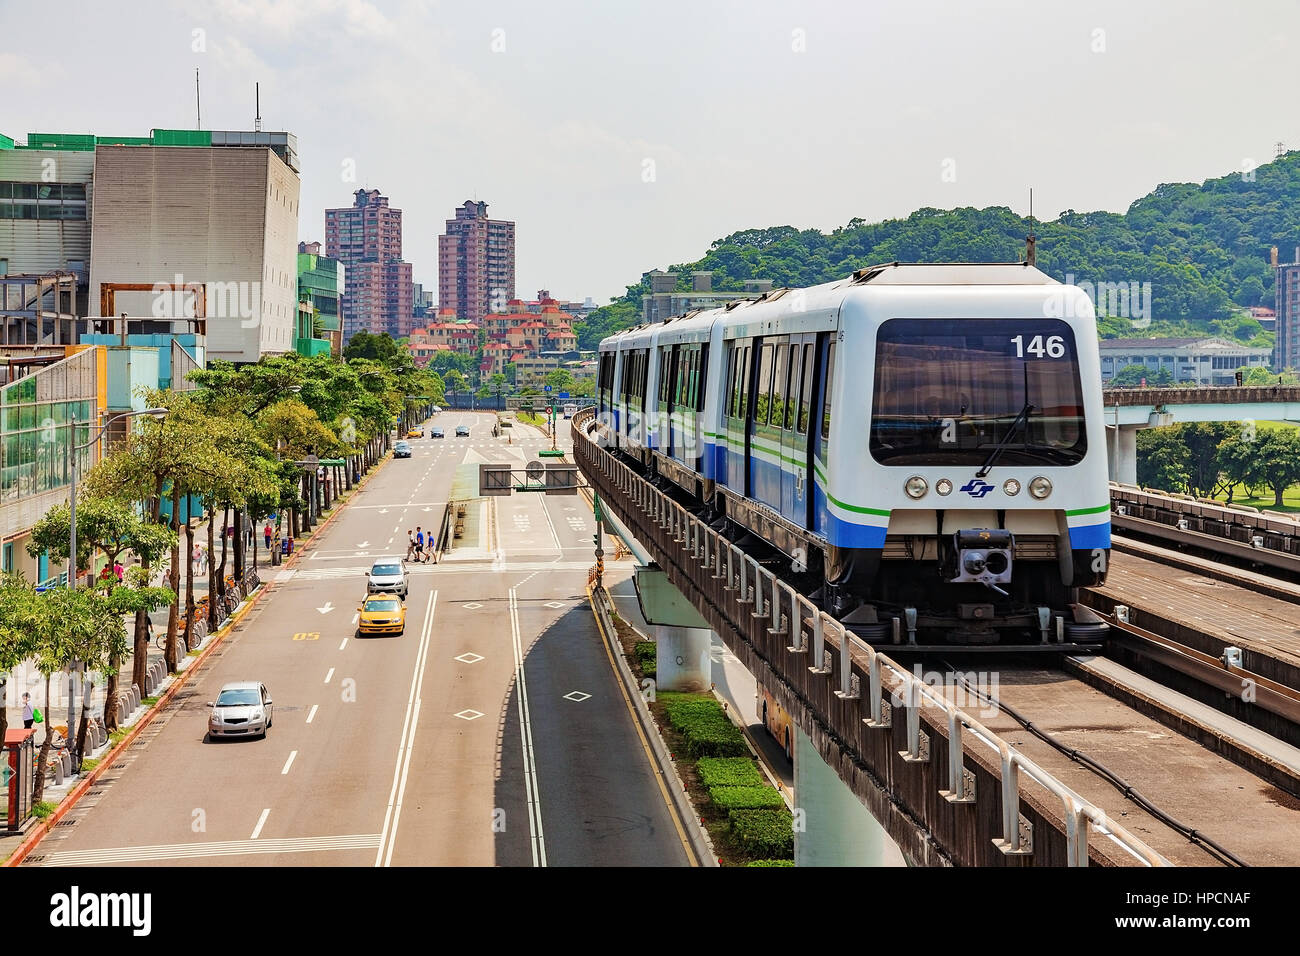 TAIPEI, TAIWAN - JULY 09: This is the taipei mrt in new taipei city which has an overground line and goes through the rural areas of Taipei on July 09 Stock Photo